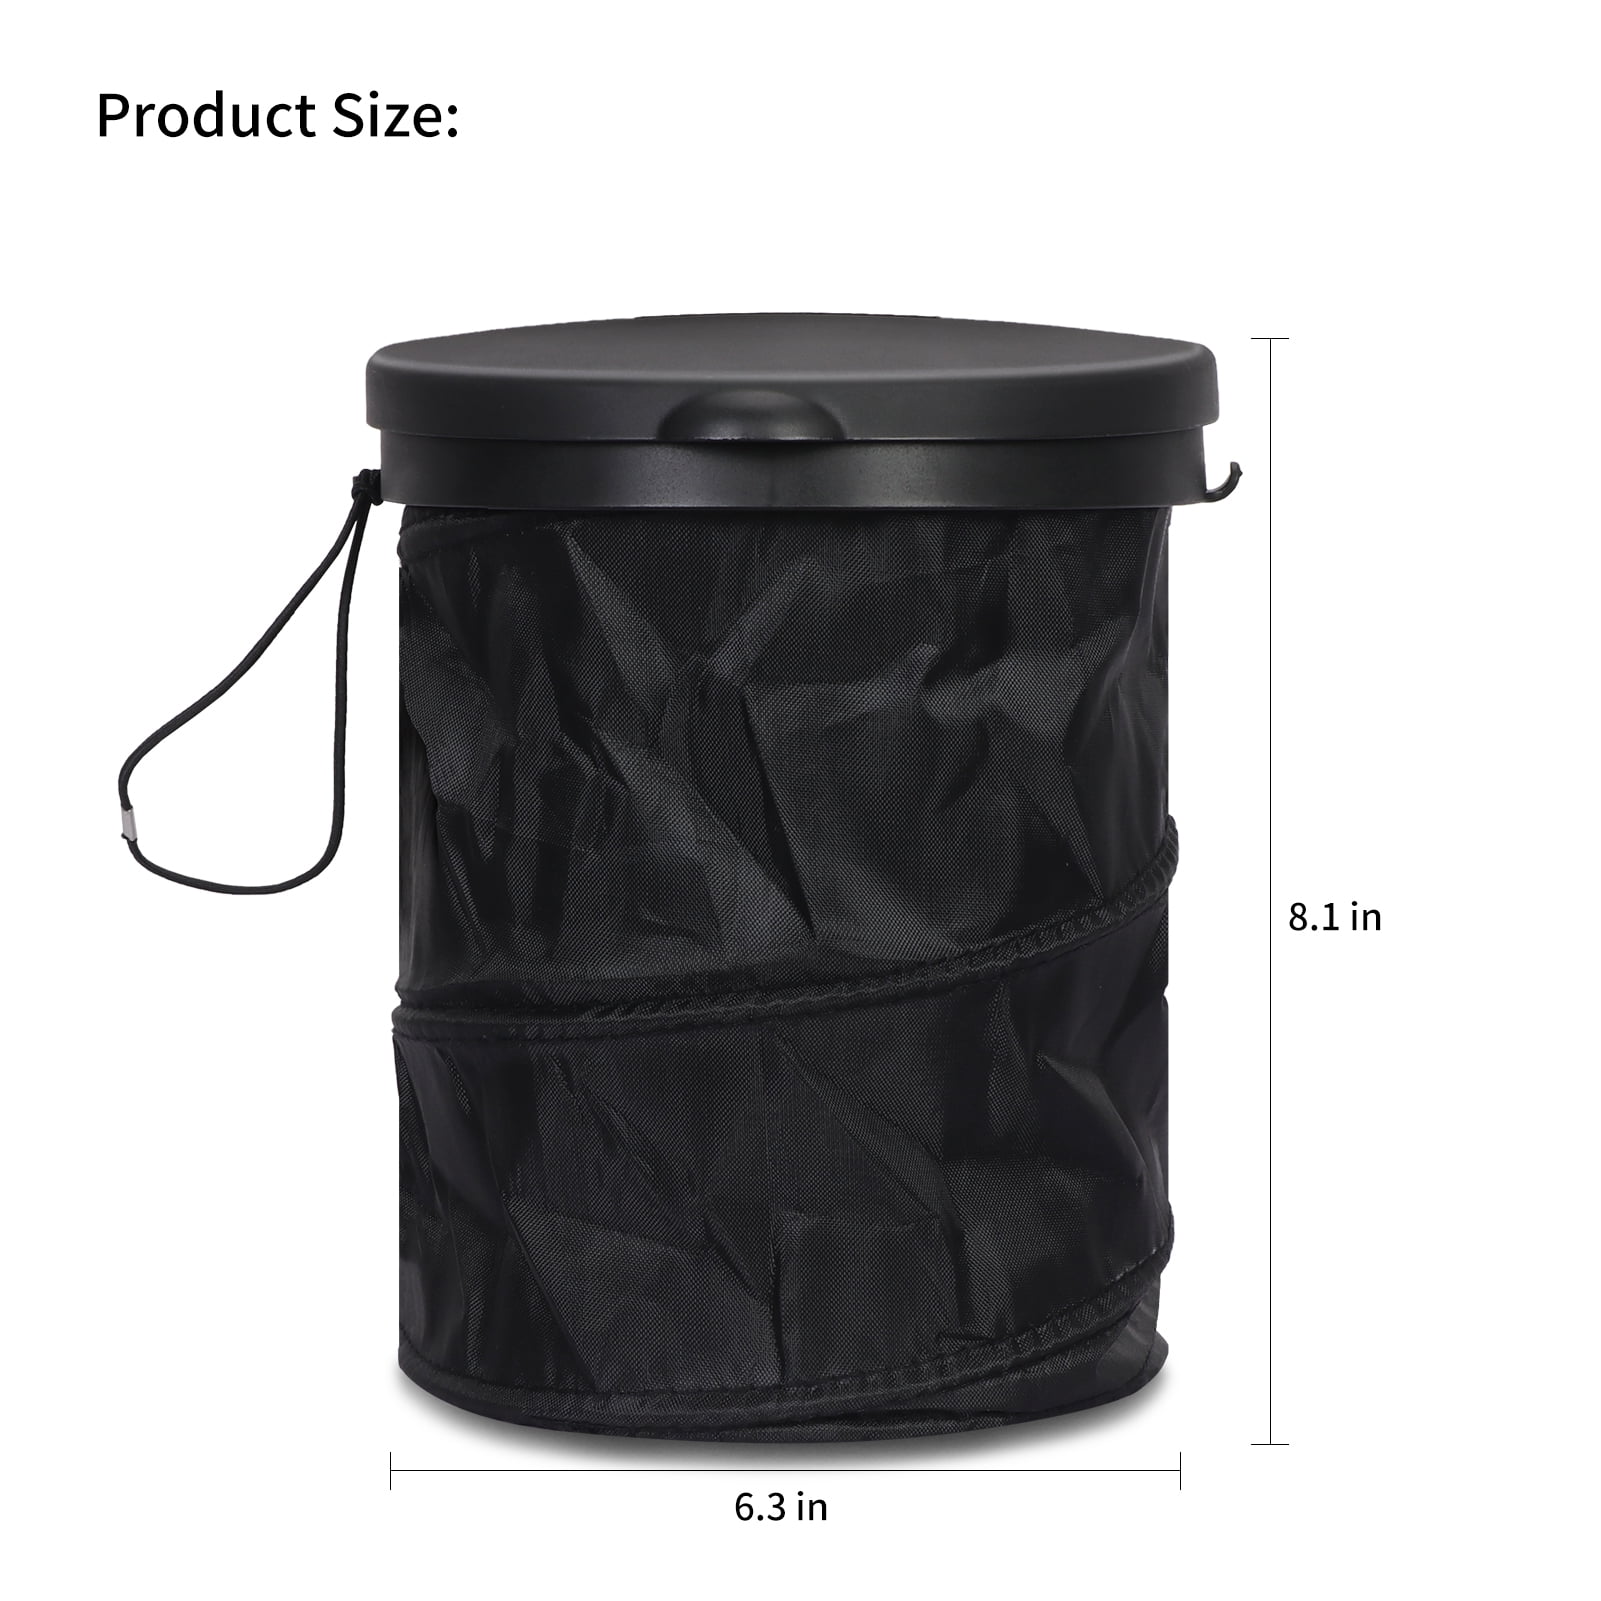 Homelove Car Trash Can, Collapsible Pop Up PU Leather Car Trash